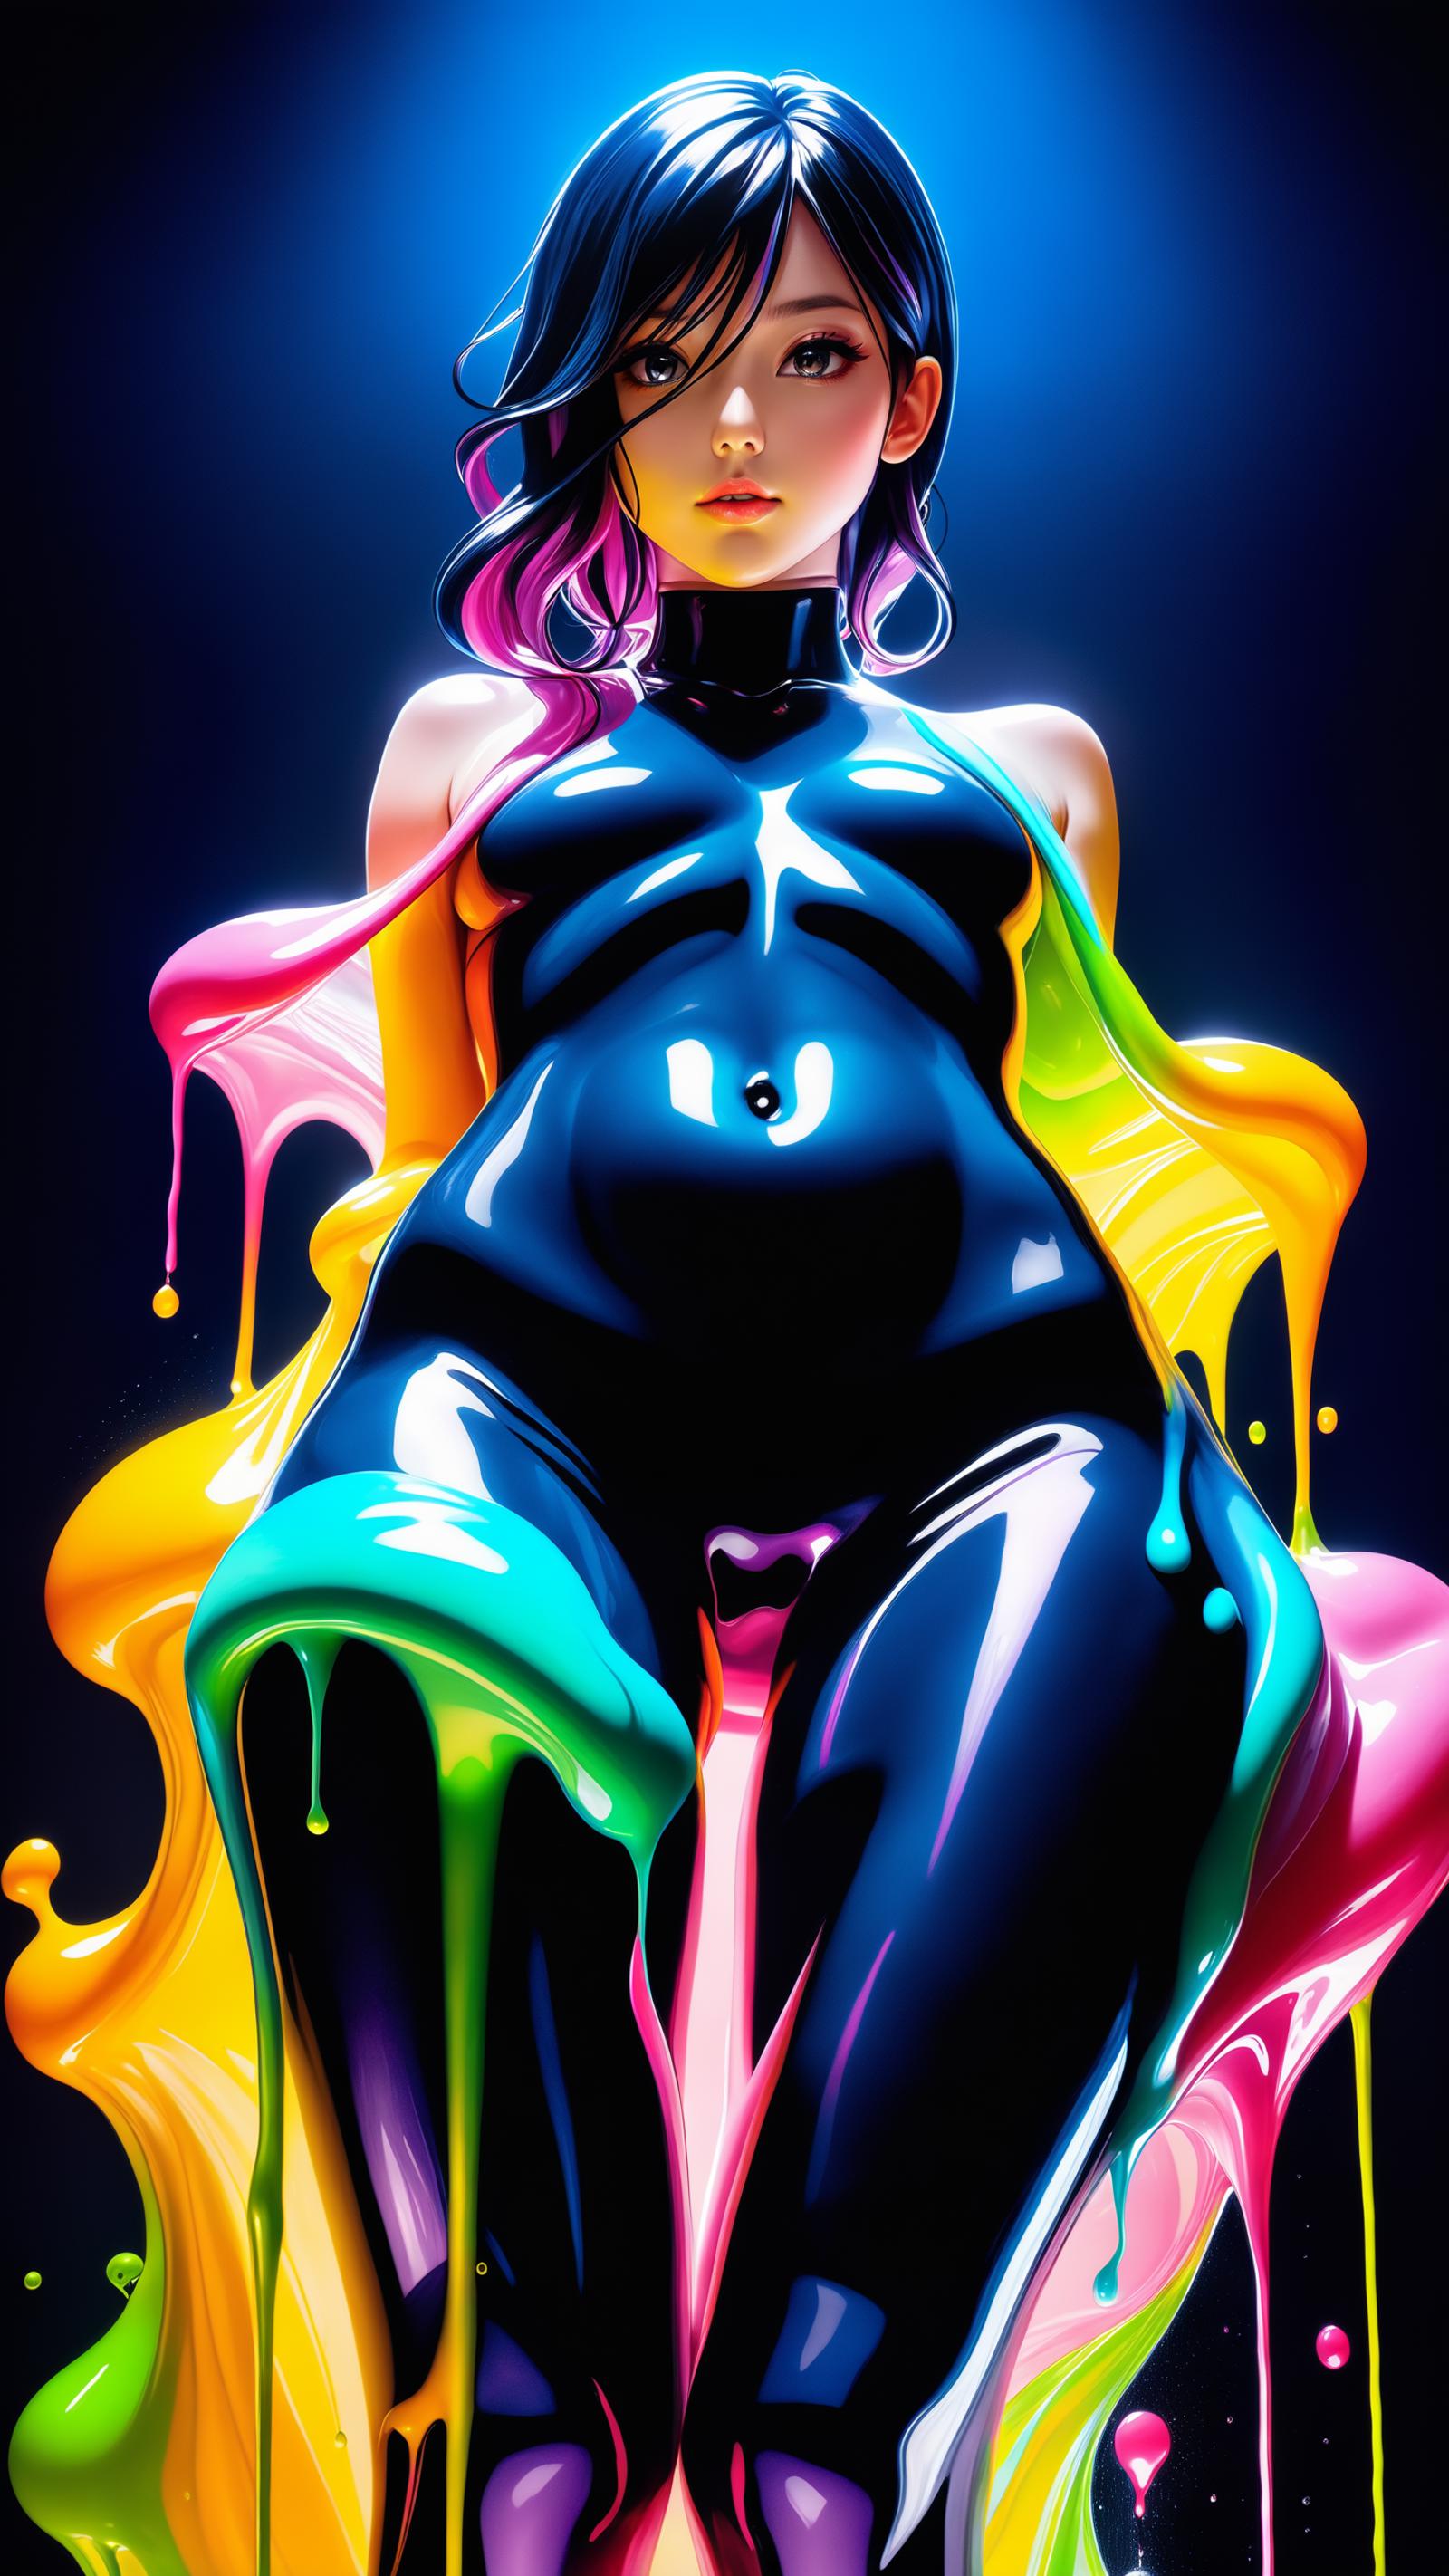 A colorful and artistic image of a woman wearing a black bodysuit and licking a lollipop.